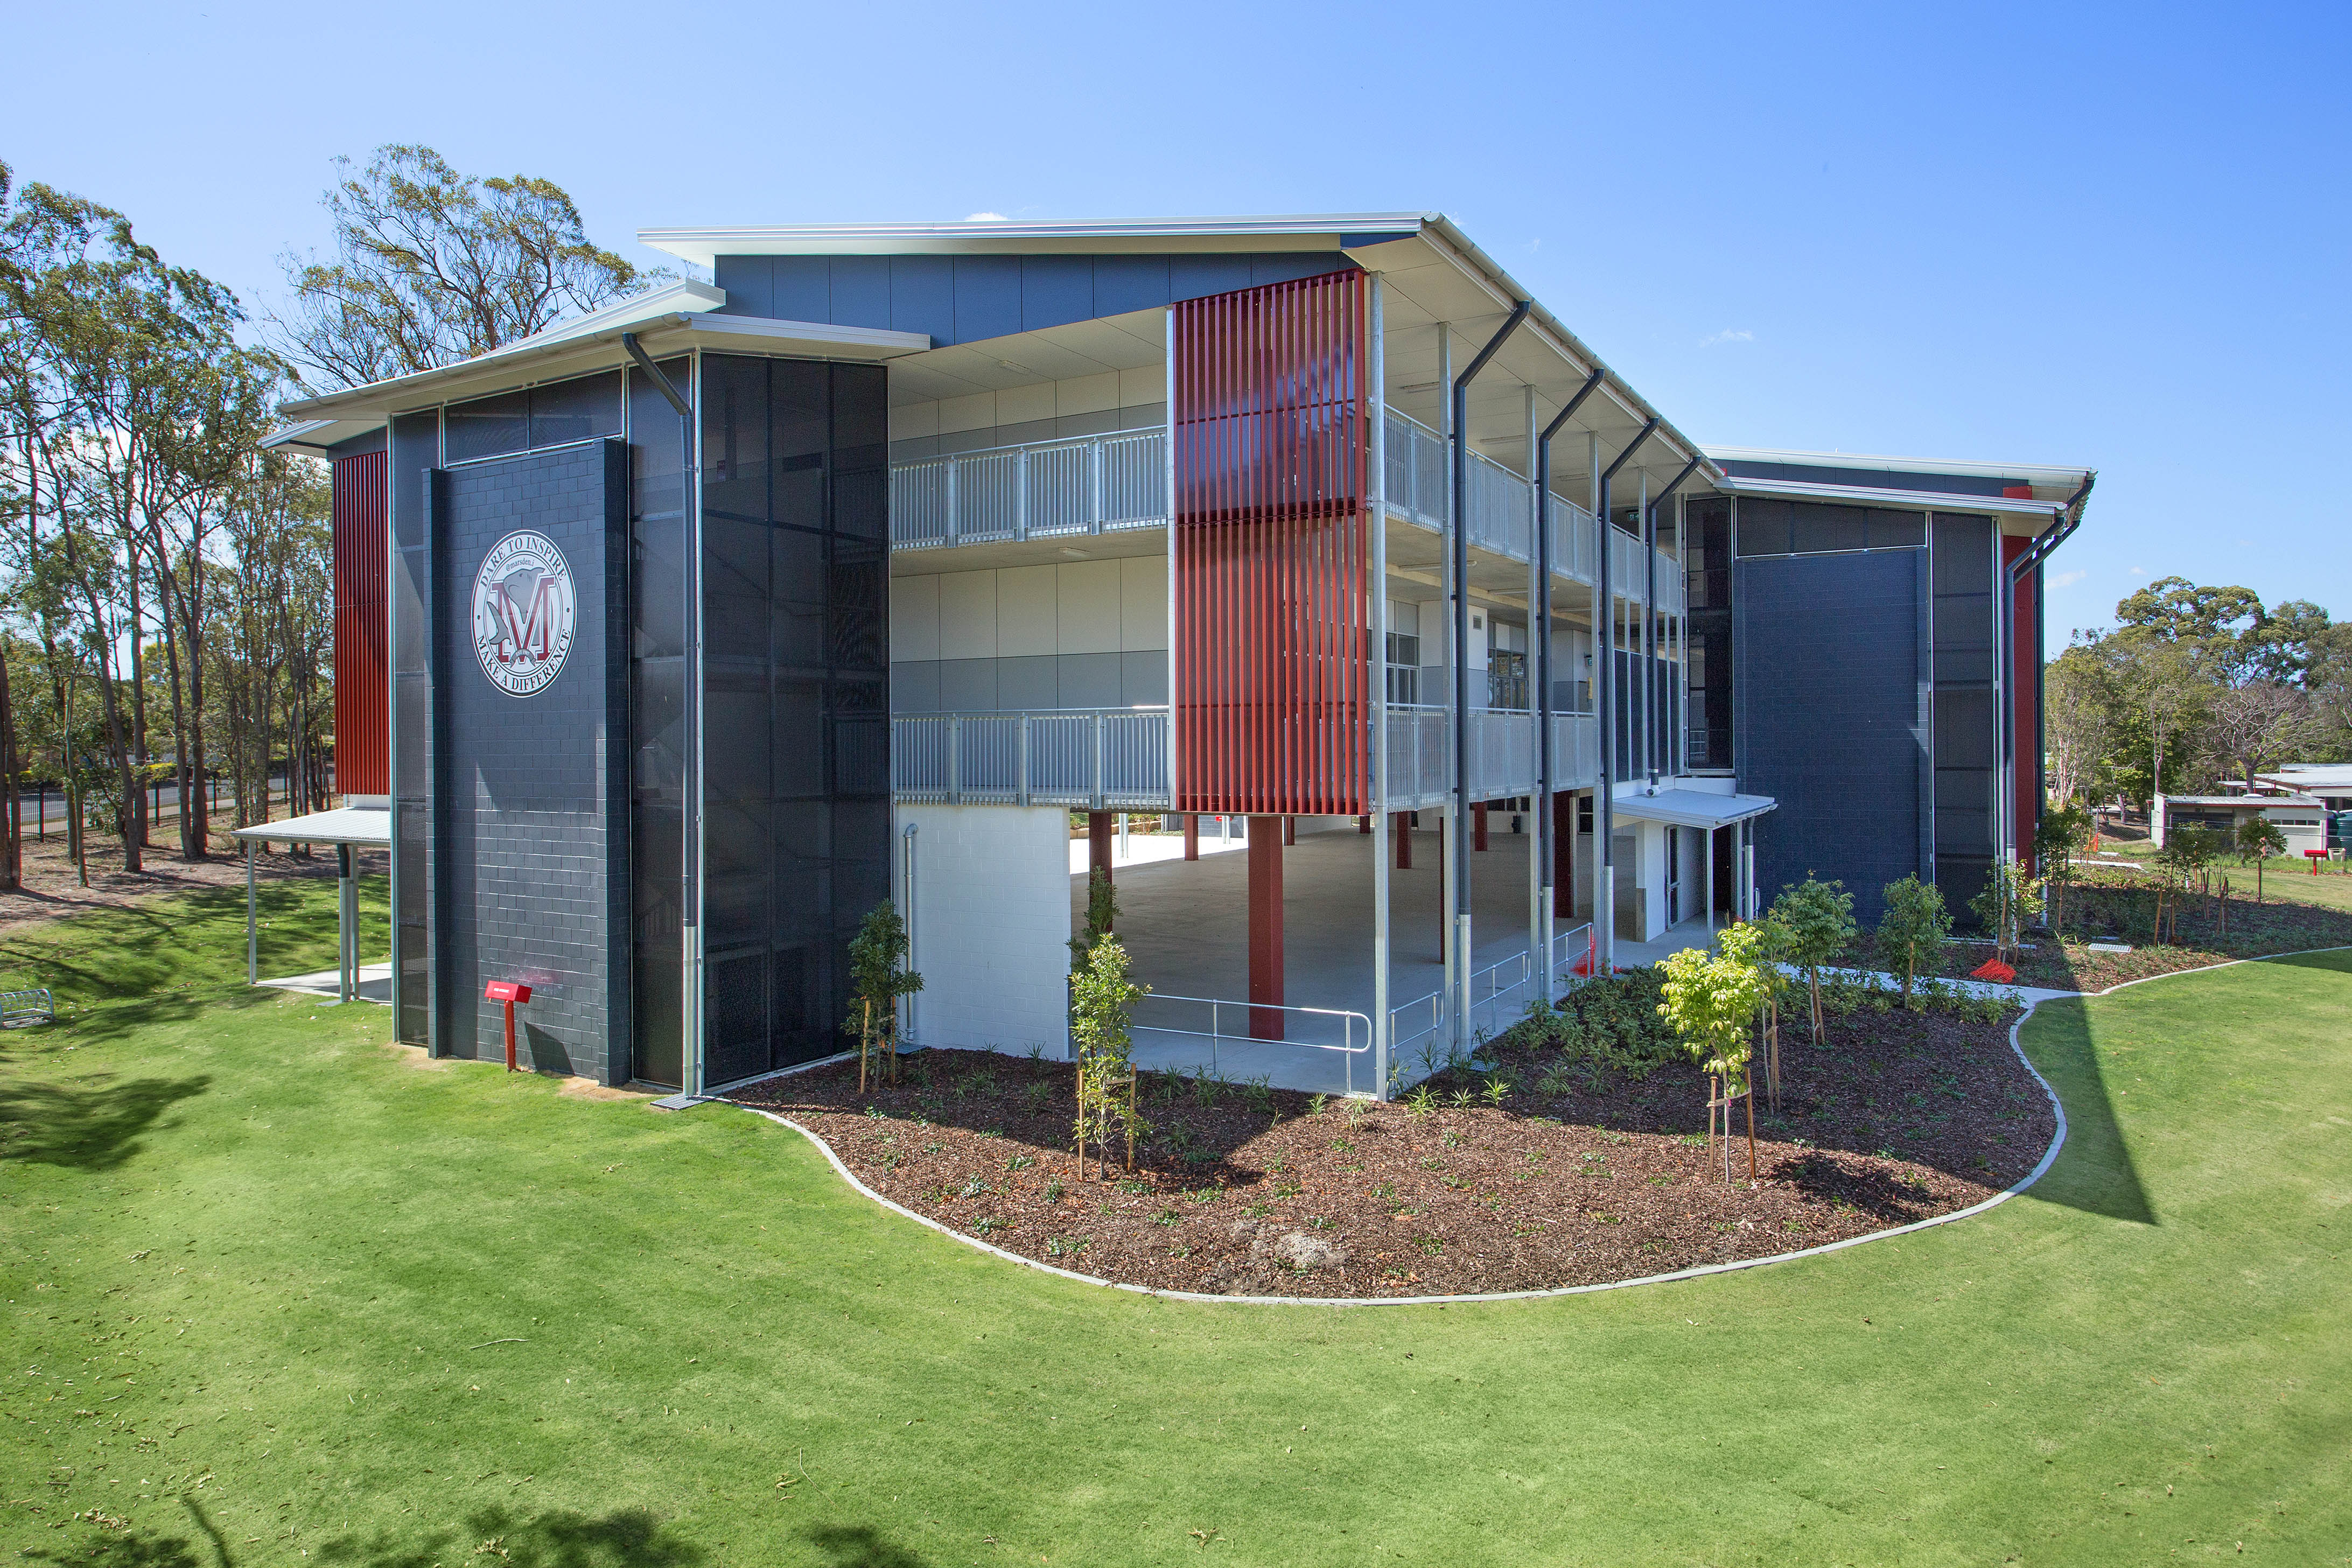 CMBM & Marsden State High School: Building Safe & Well-Maintained Environments